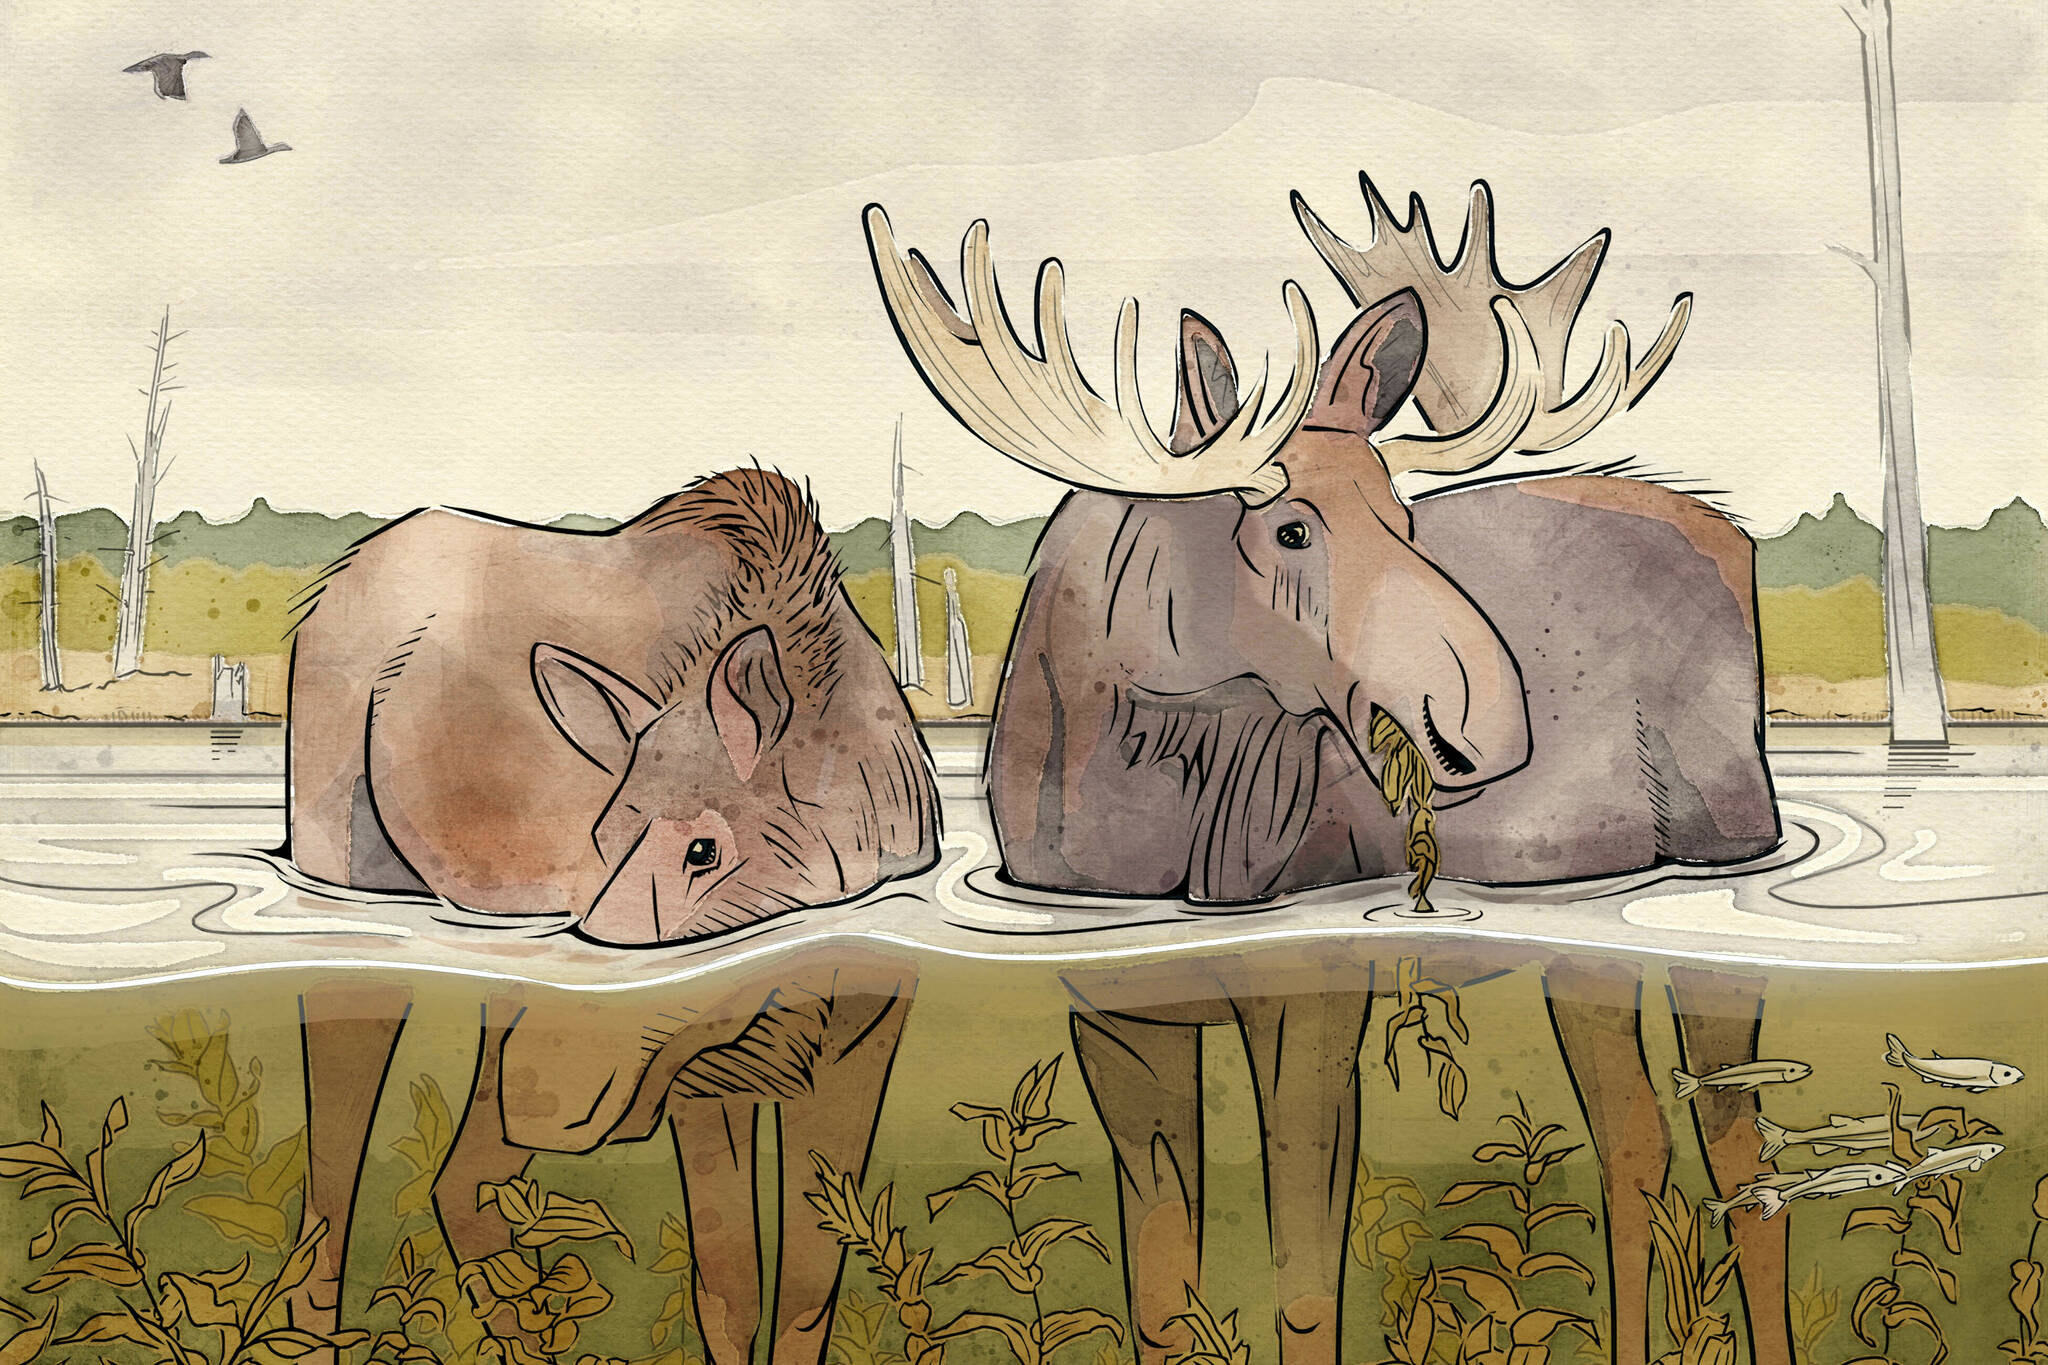 Artist Liza McElroy of Seward, Alaska, recently sketched two moose in their summertime aquatic environment to illustrate this story. (Courtesy Image / Liza McElroy)